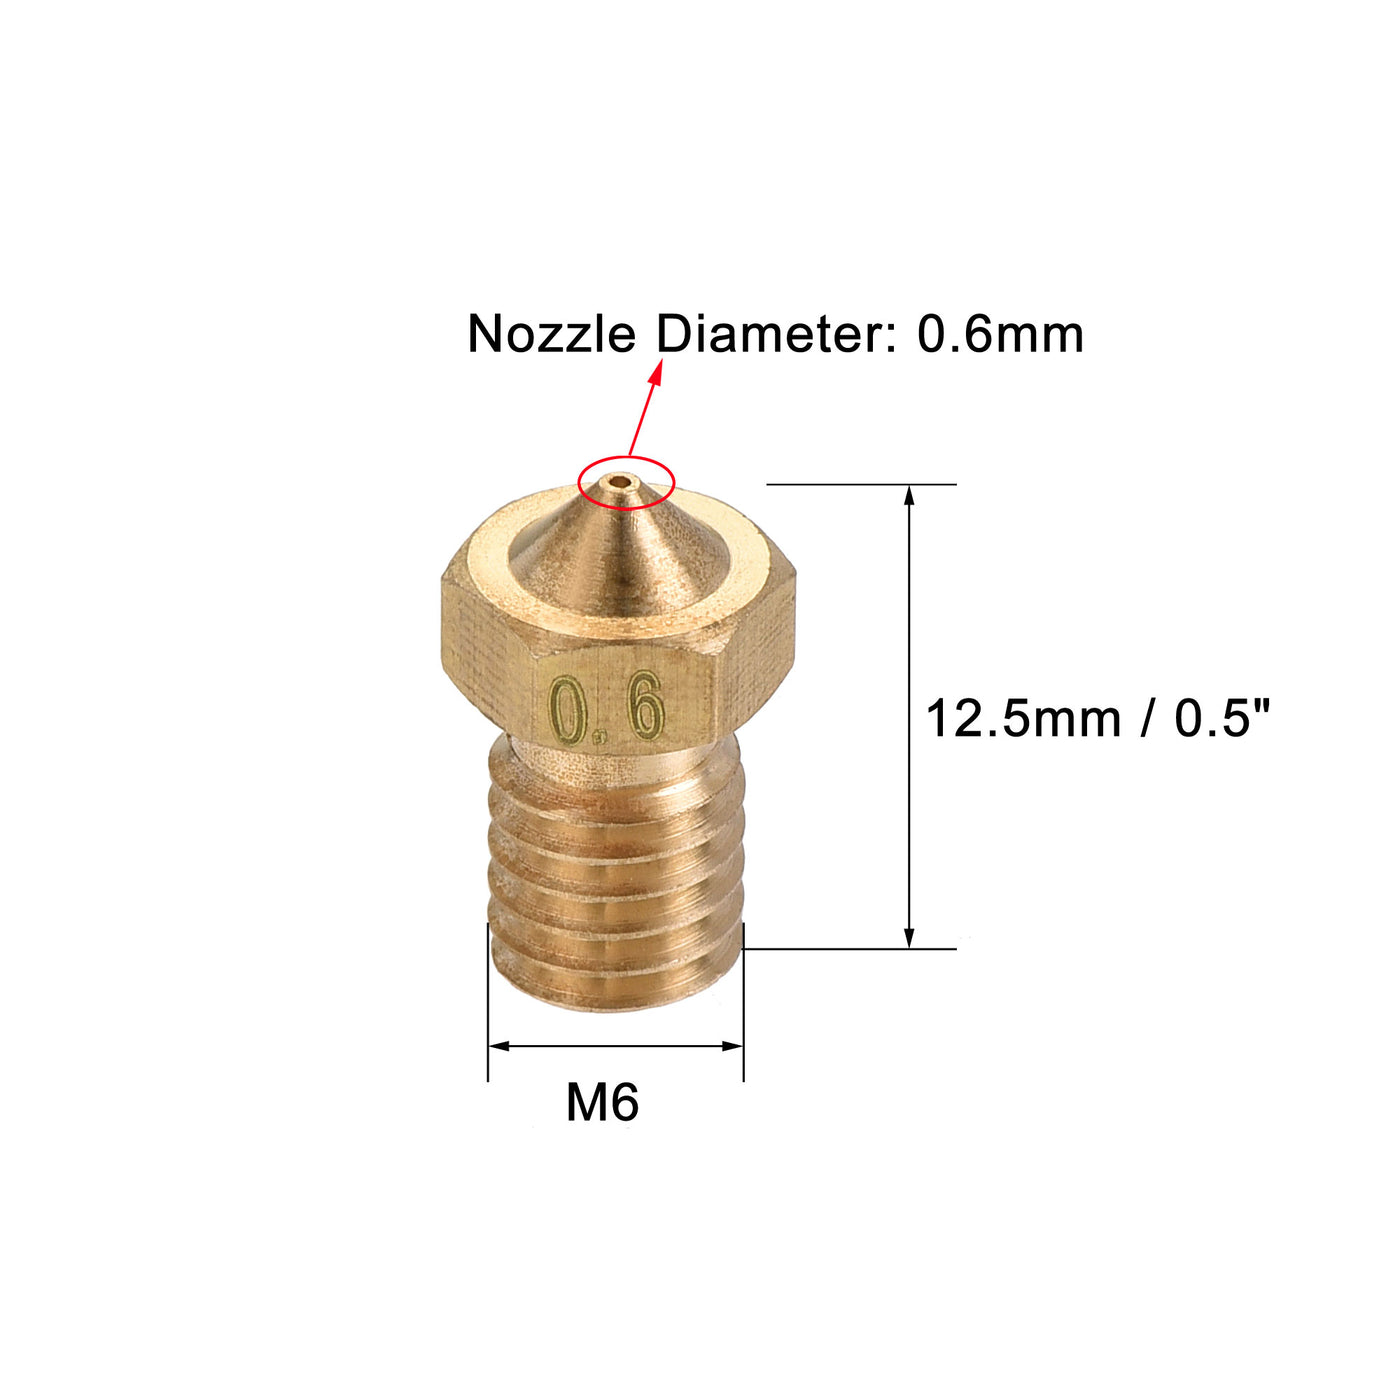 uxcell Uxcell 0.6mm 3D Printer Nozzle, 14pcs M6 Thread for V5 V6 1.75mm Extruder Print, Brass